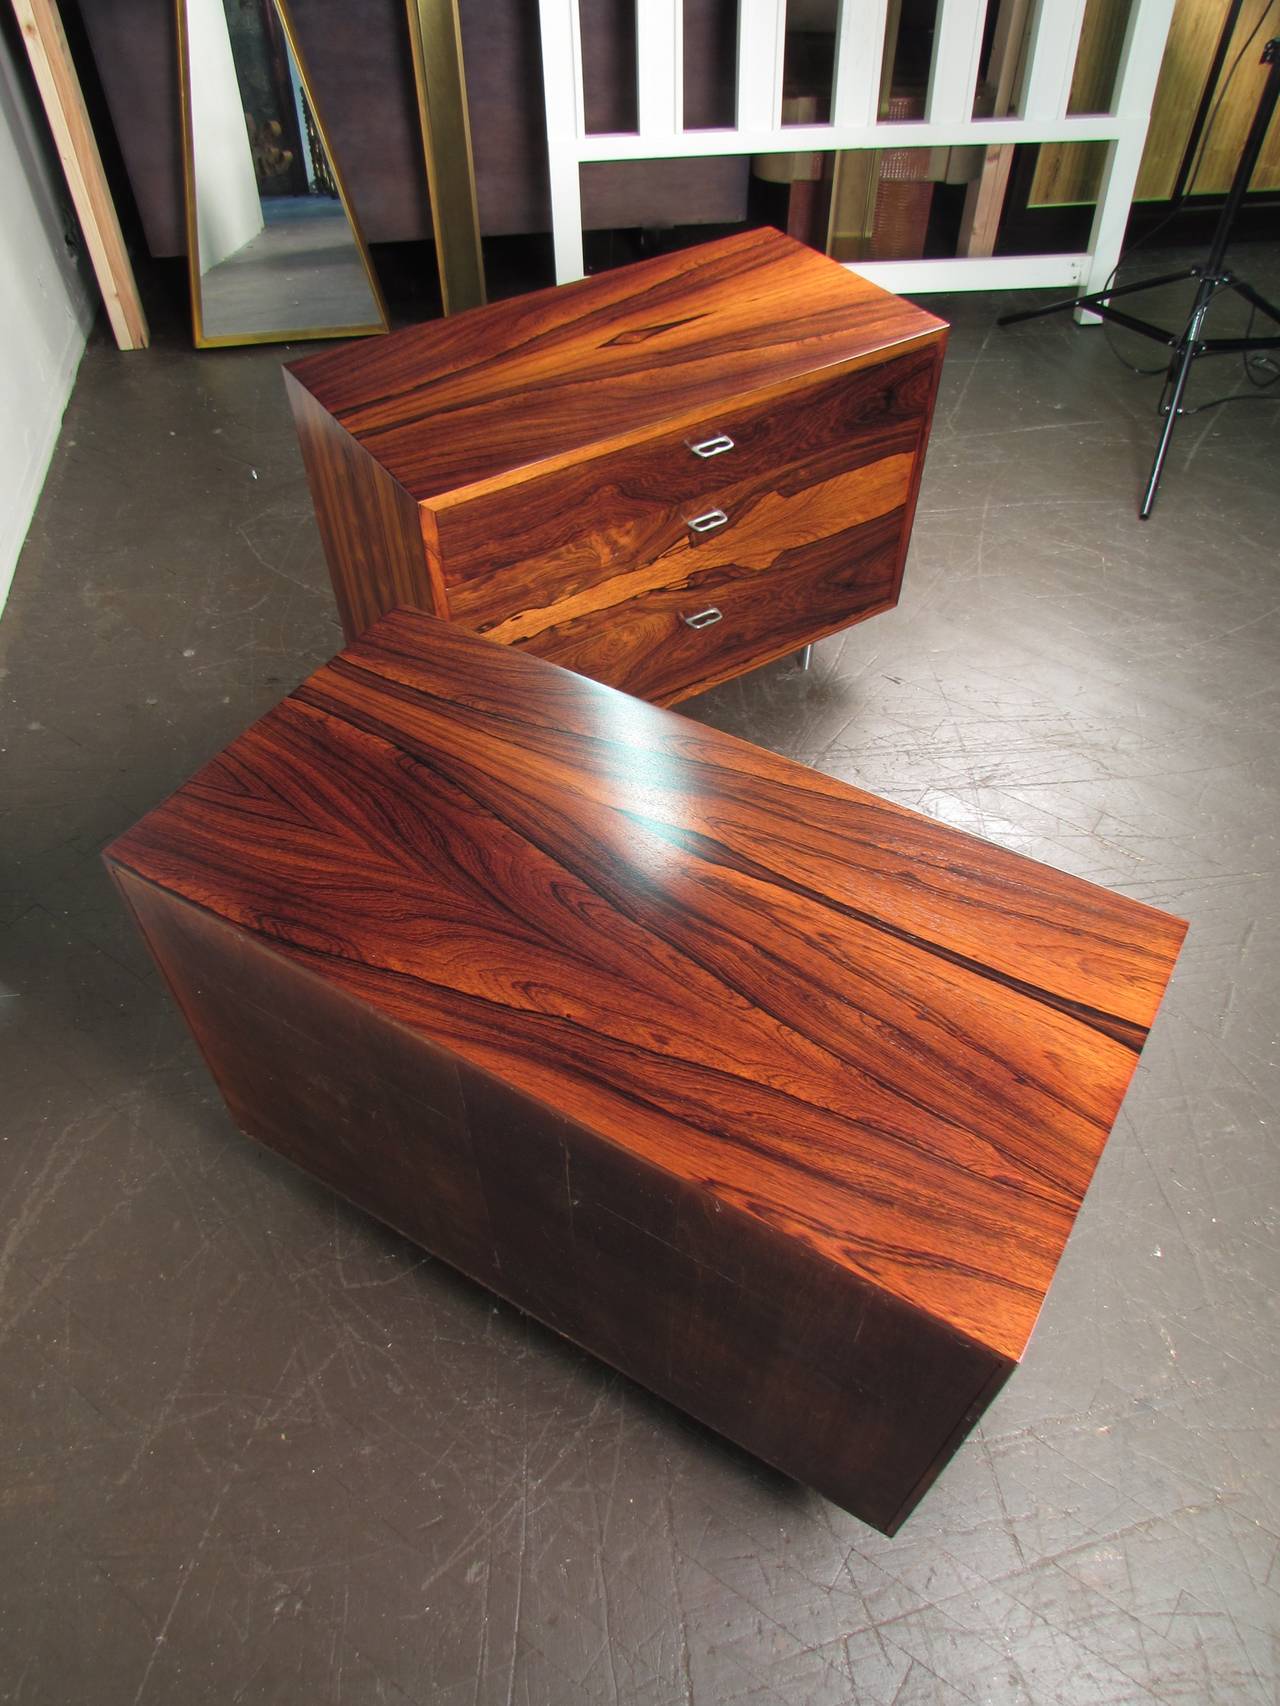 Fantastic pair of rosewood chests or nightstands with aluminum hardware. These cabinets are very versatile because of there size. They can function as a credenza, buffet, dresser, nightstand etc. The wood grain is extraordinary. 

We offer free